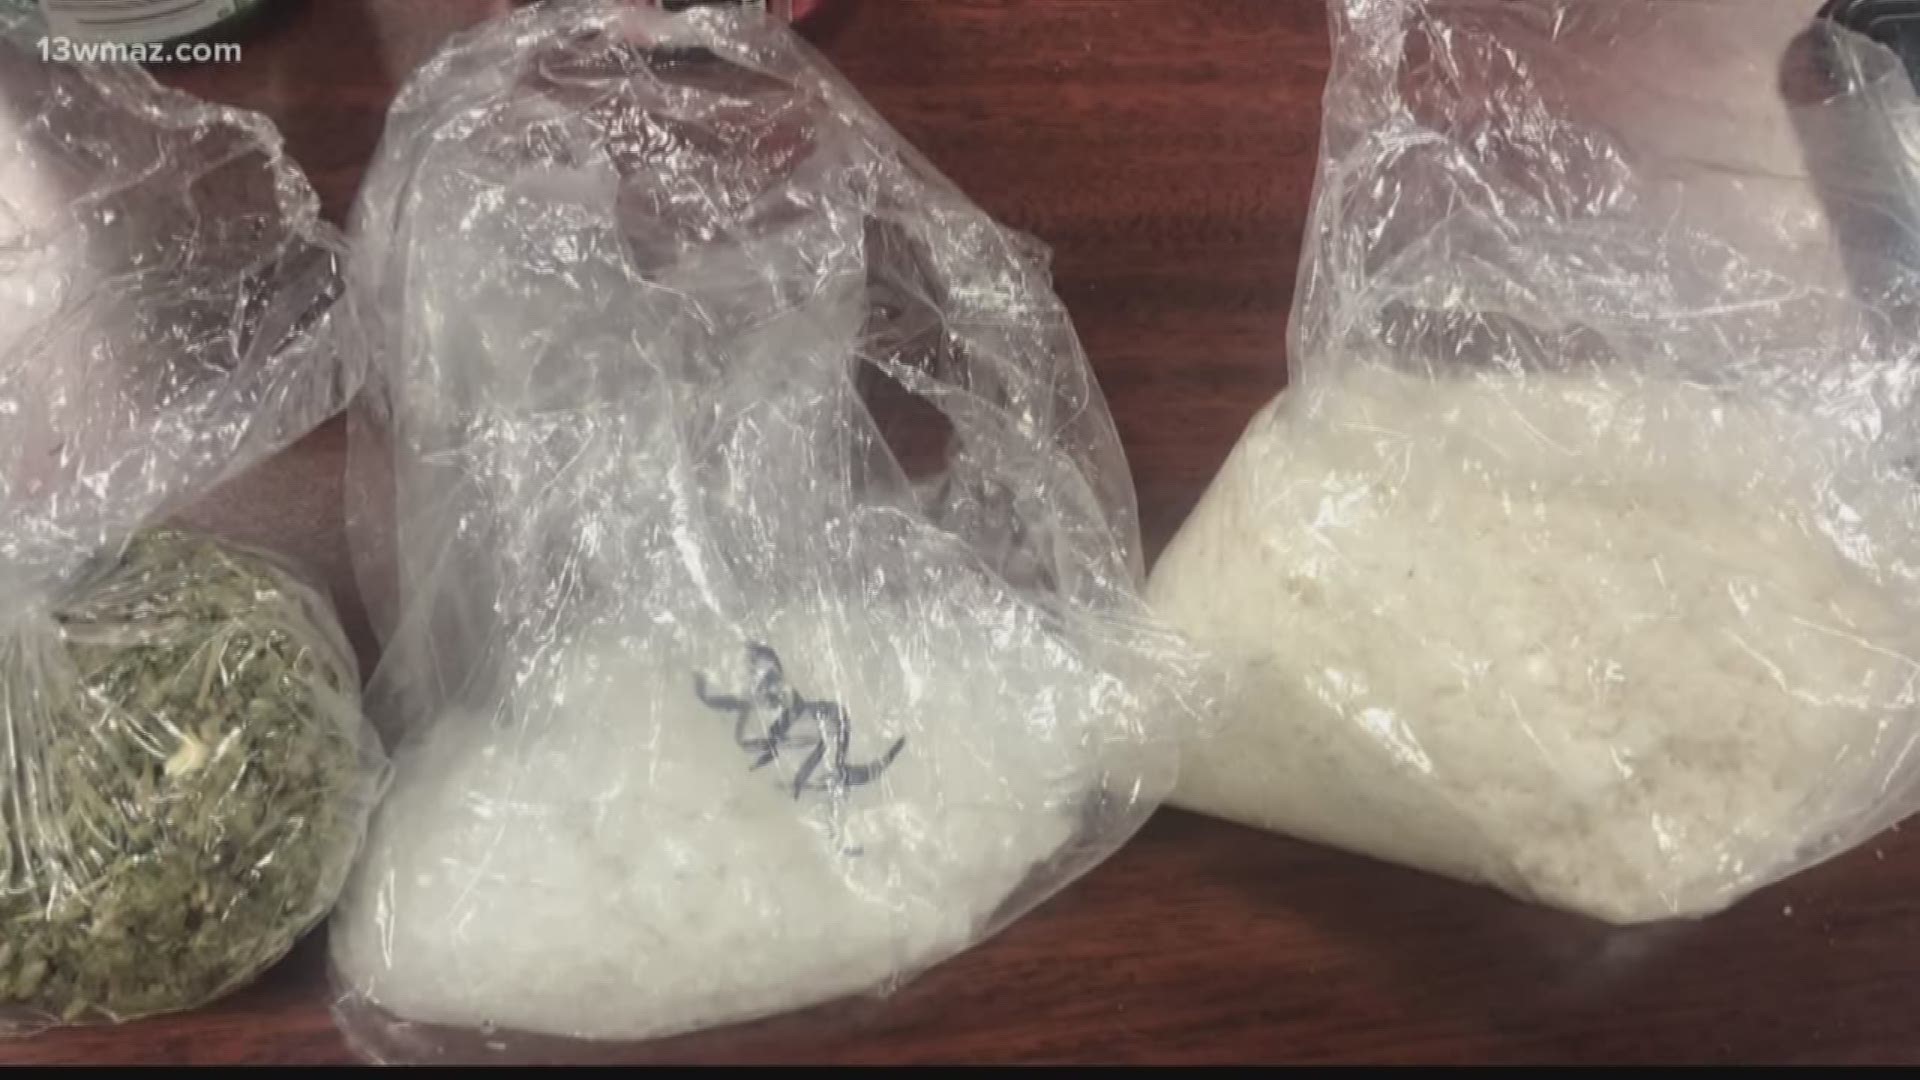 After a toddler tested positive for methamphetamine, the Laurens County Sheriff's Department is trying to find out why.